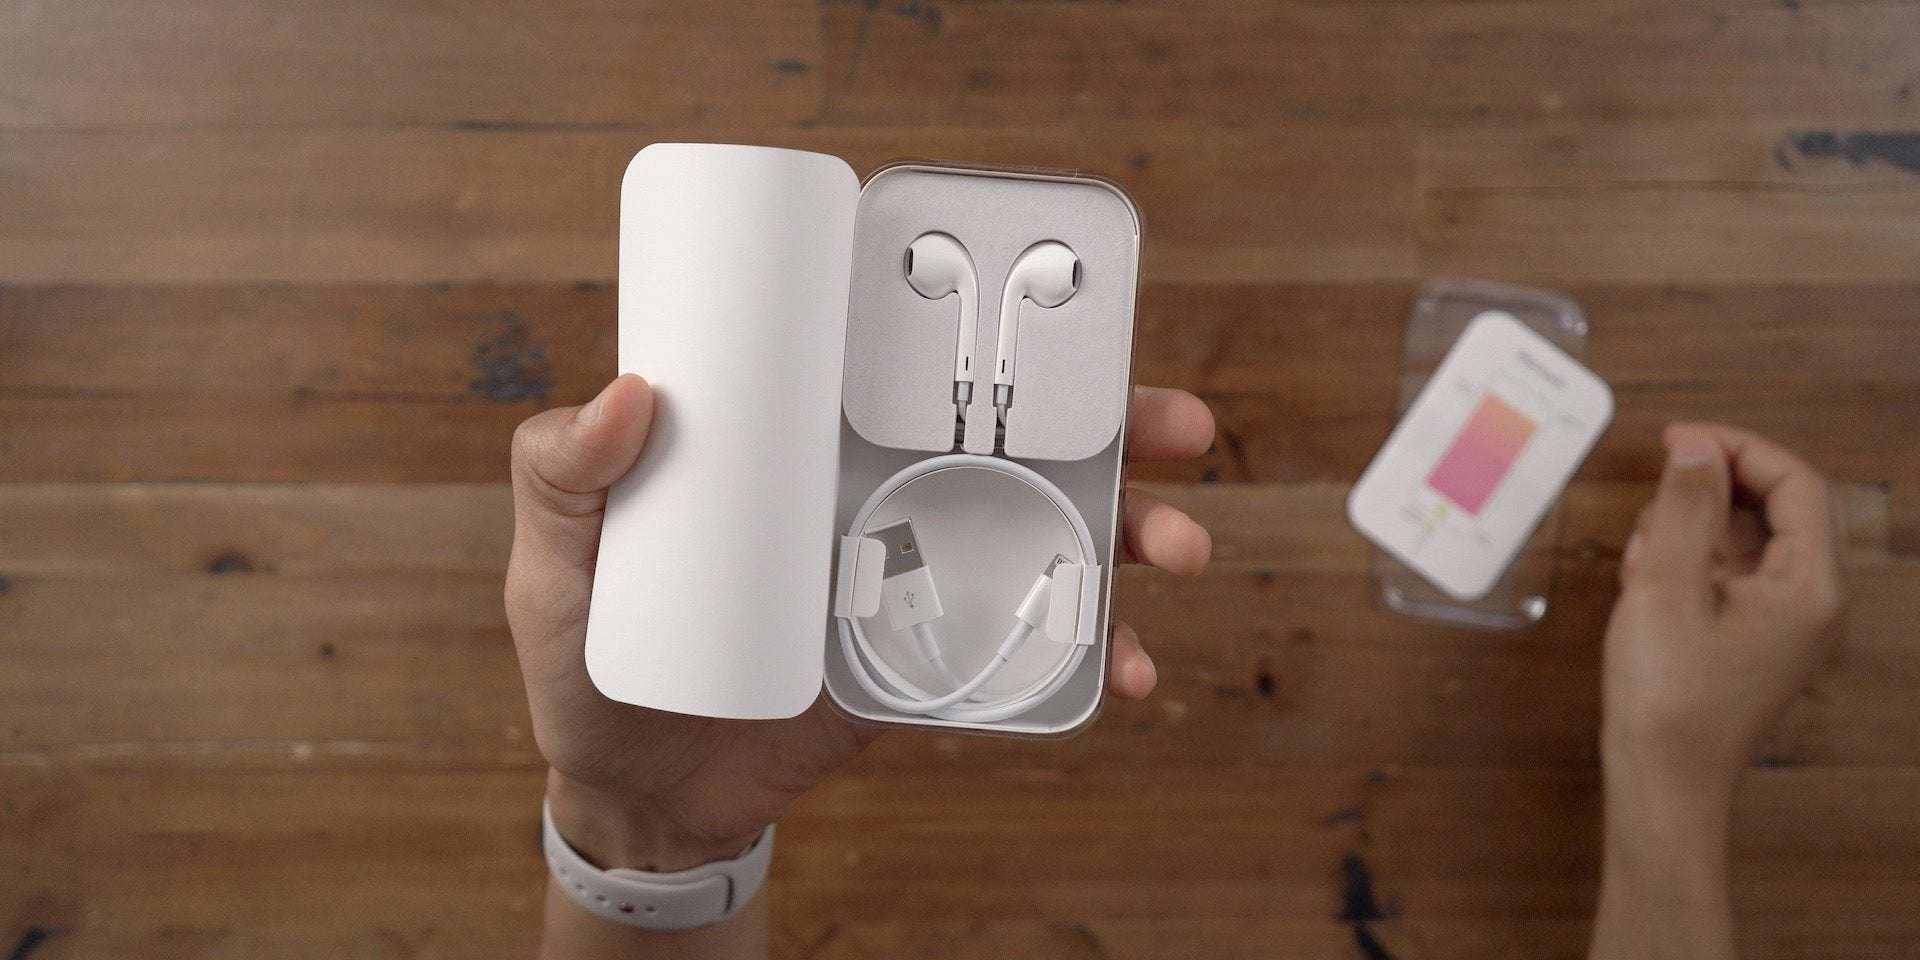 image for Kuo: Apple may not include EarPods headphones in iPhone 12 box to boost AirPods sales